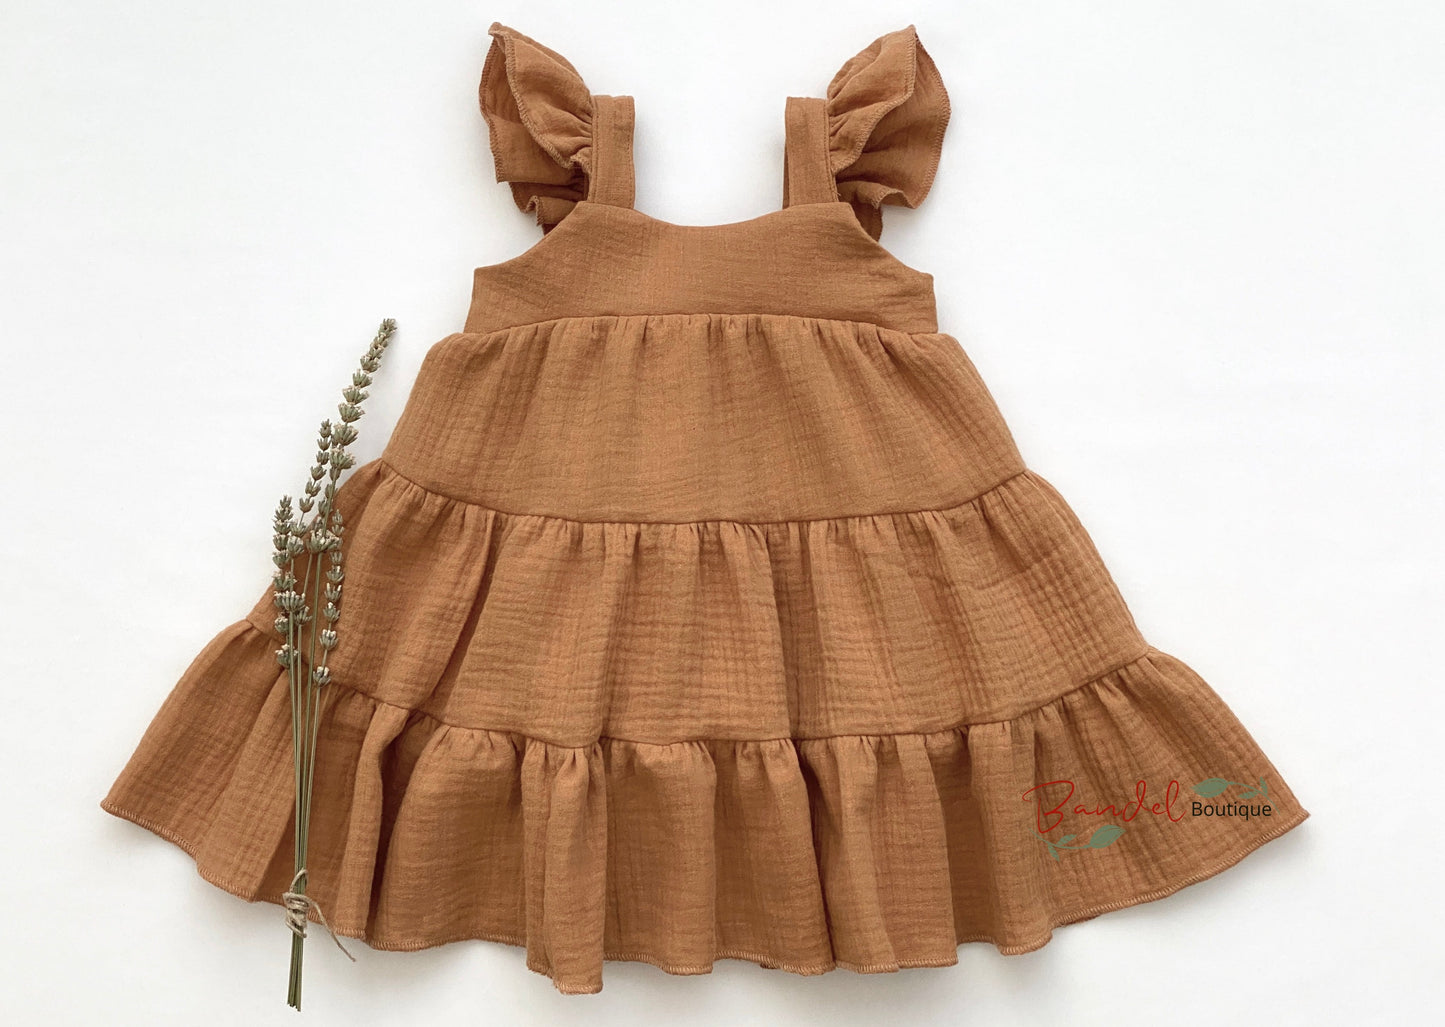 Caramel Flutter Sleeve Girl Dress is crafted from sustainable muslin fabric and features a gathered, tiered skirt and fluttery sleeves. Elastic on the back bodice allows for a comfortable fit.